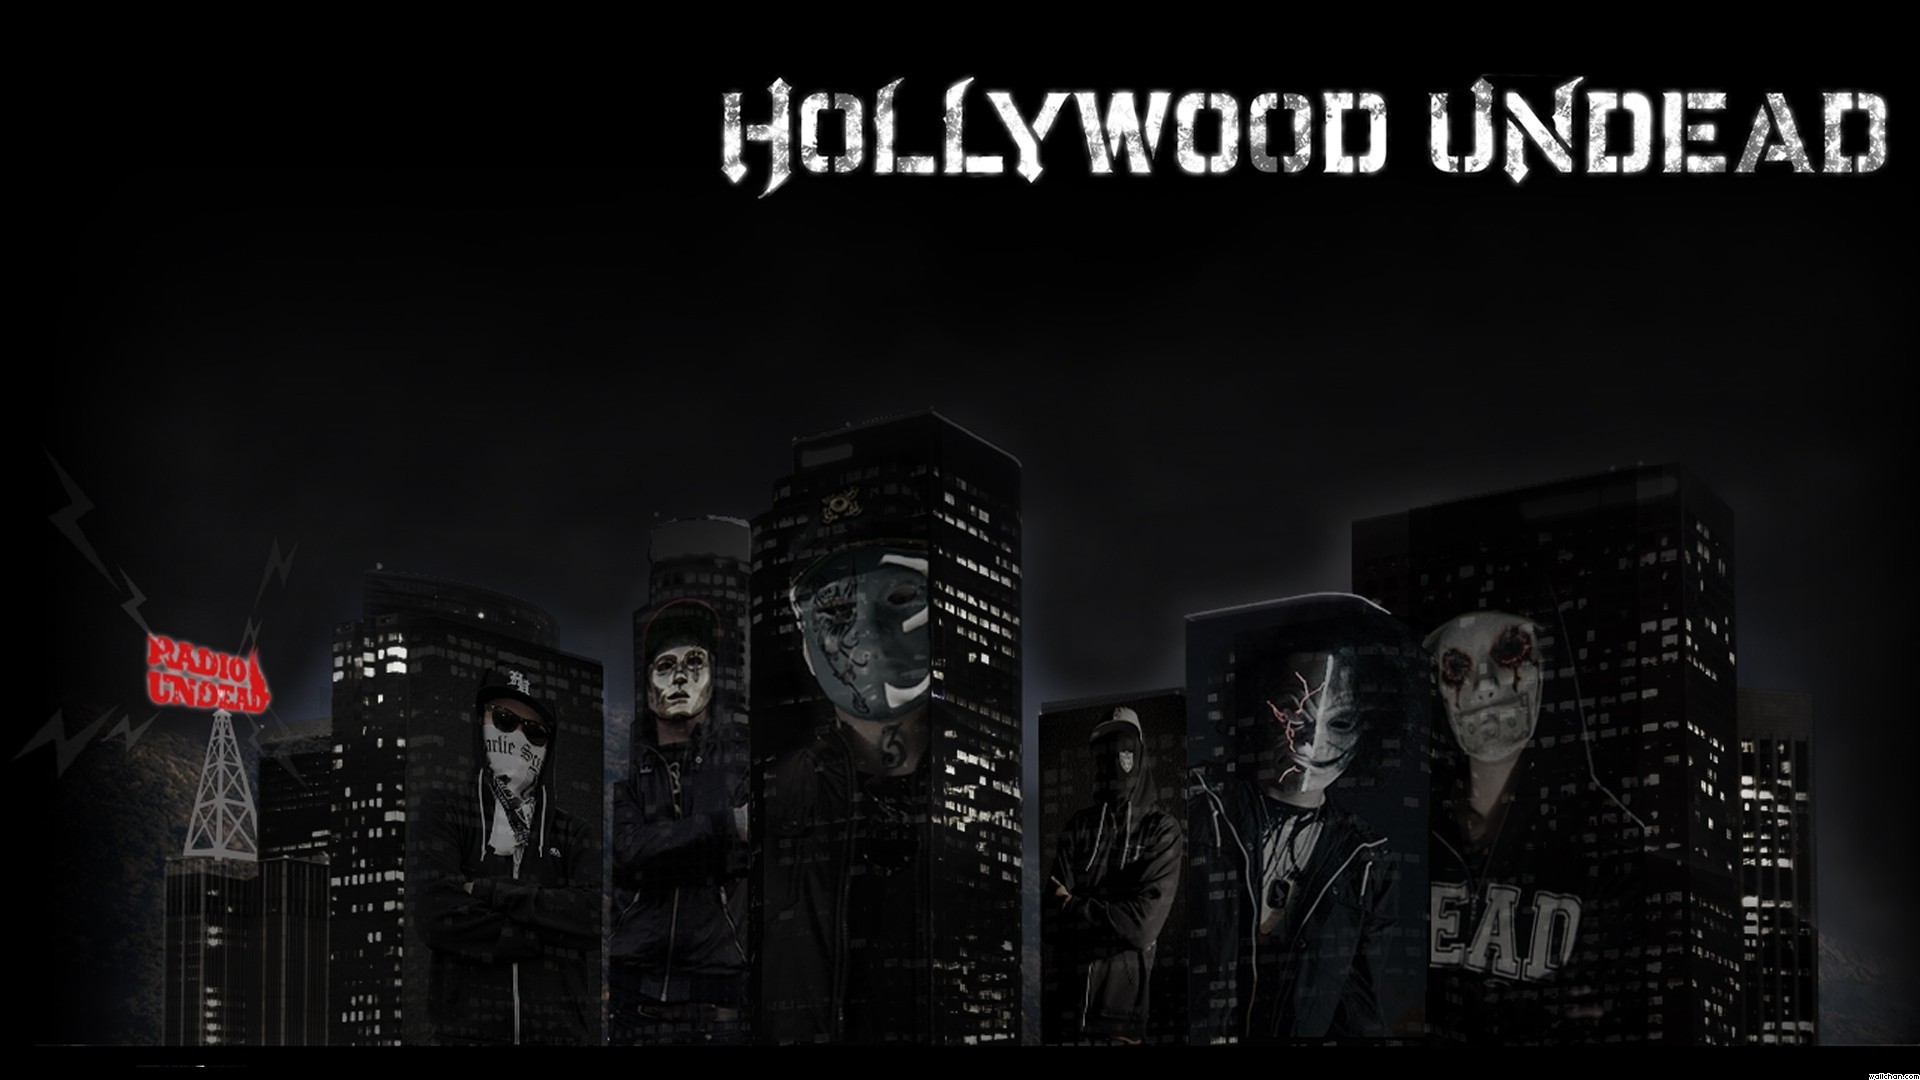 1920x1080 Download Â· Hollywood undead wallpaper backgrounds wallpapersafari